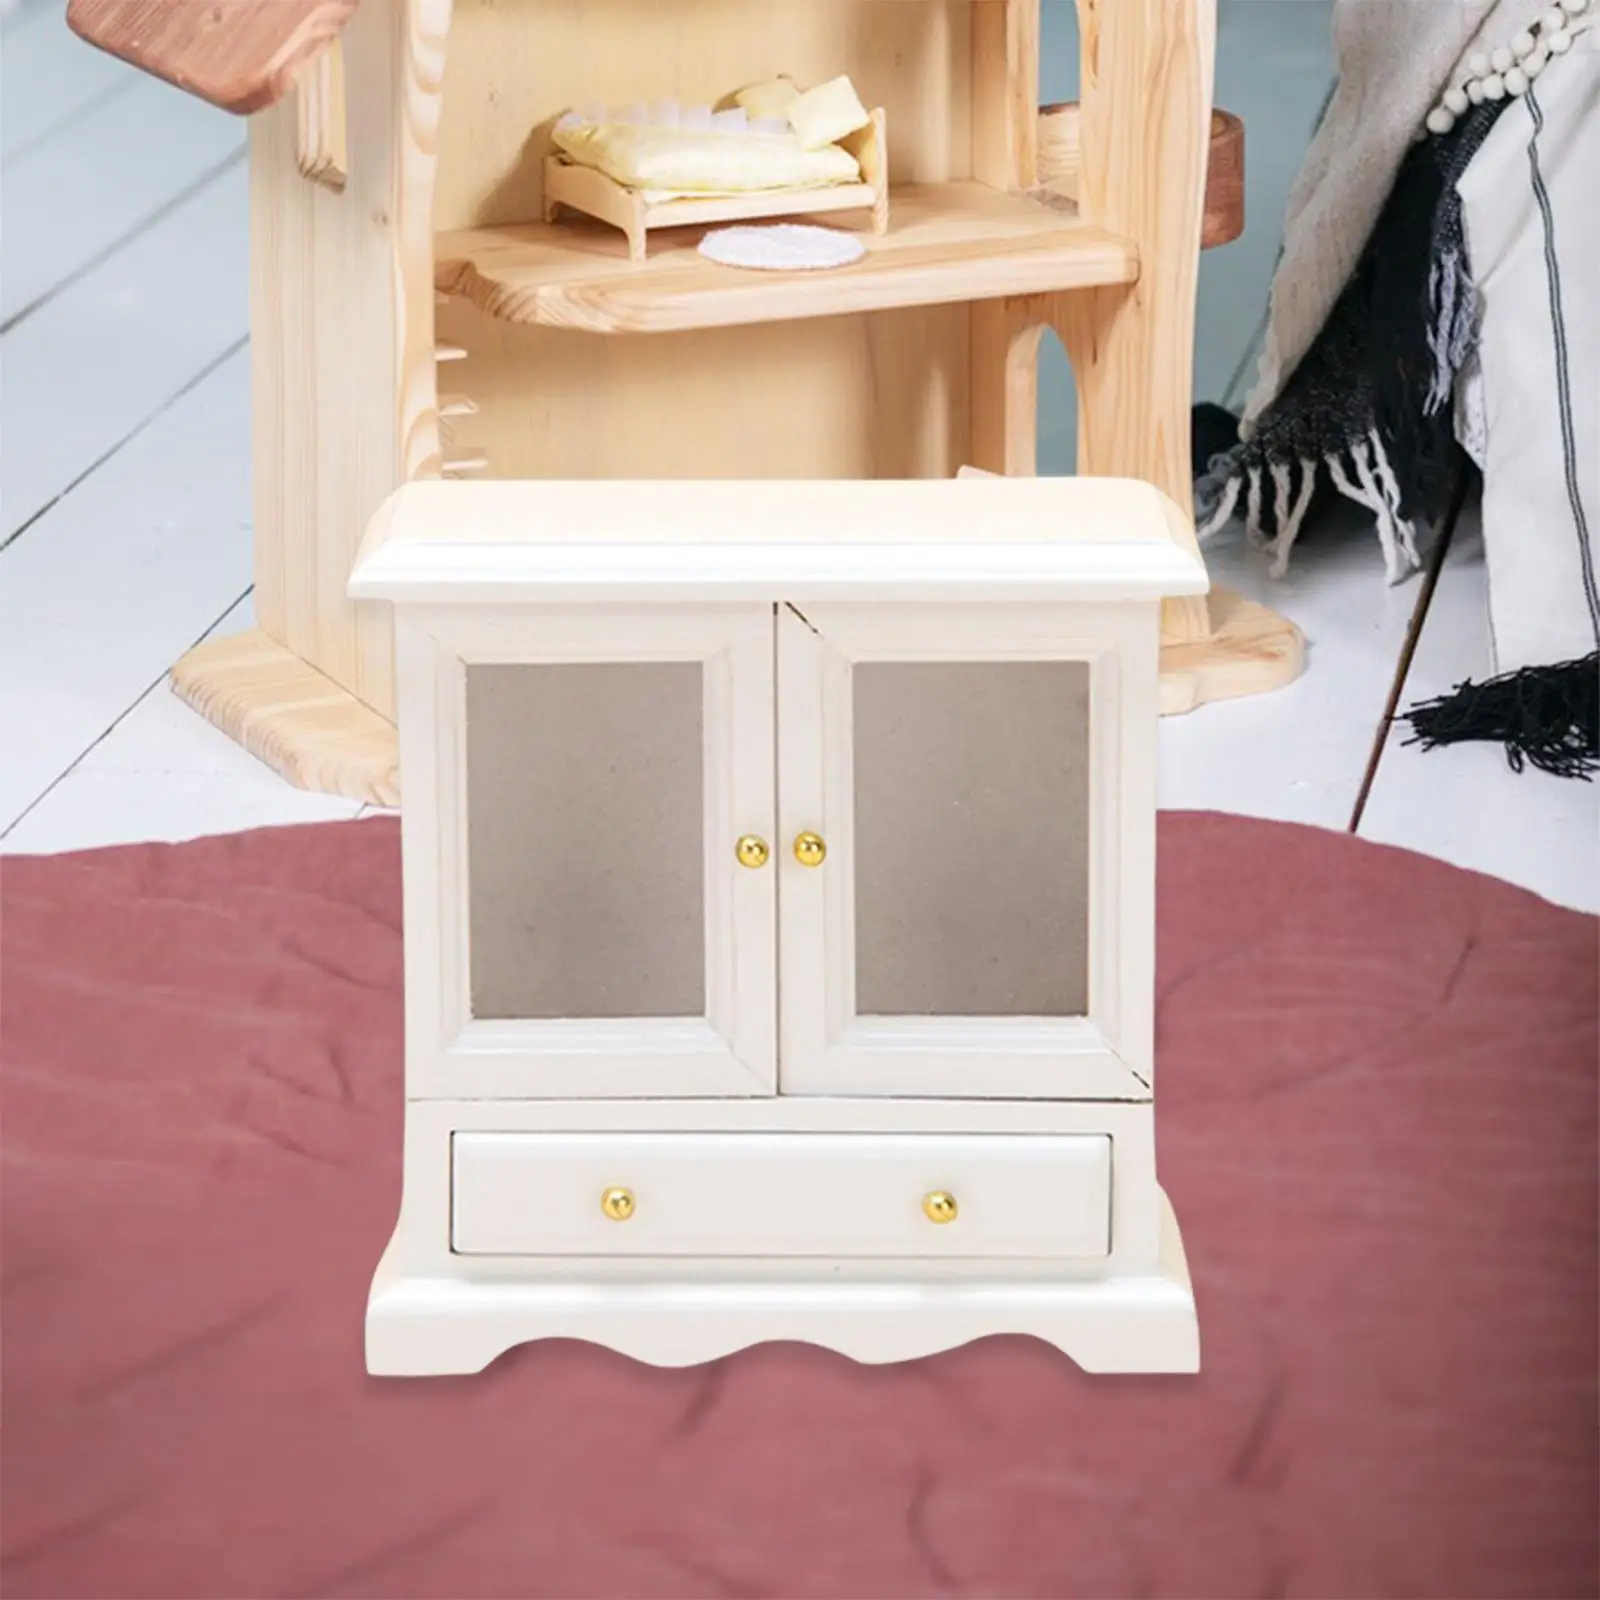 1/12 Dollhouse Display Cabinet Stand Miniature Wood Furniture for Kitchen